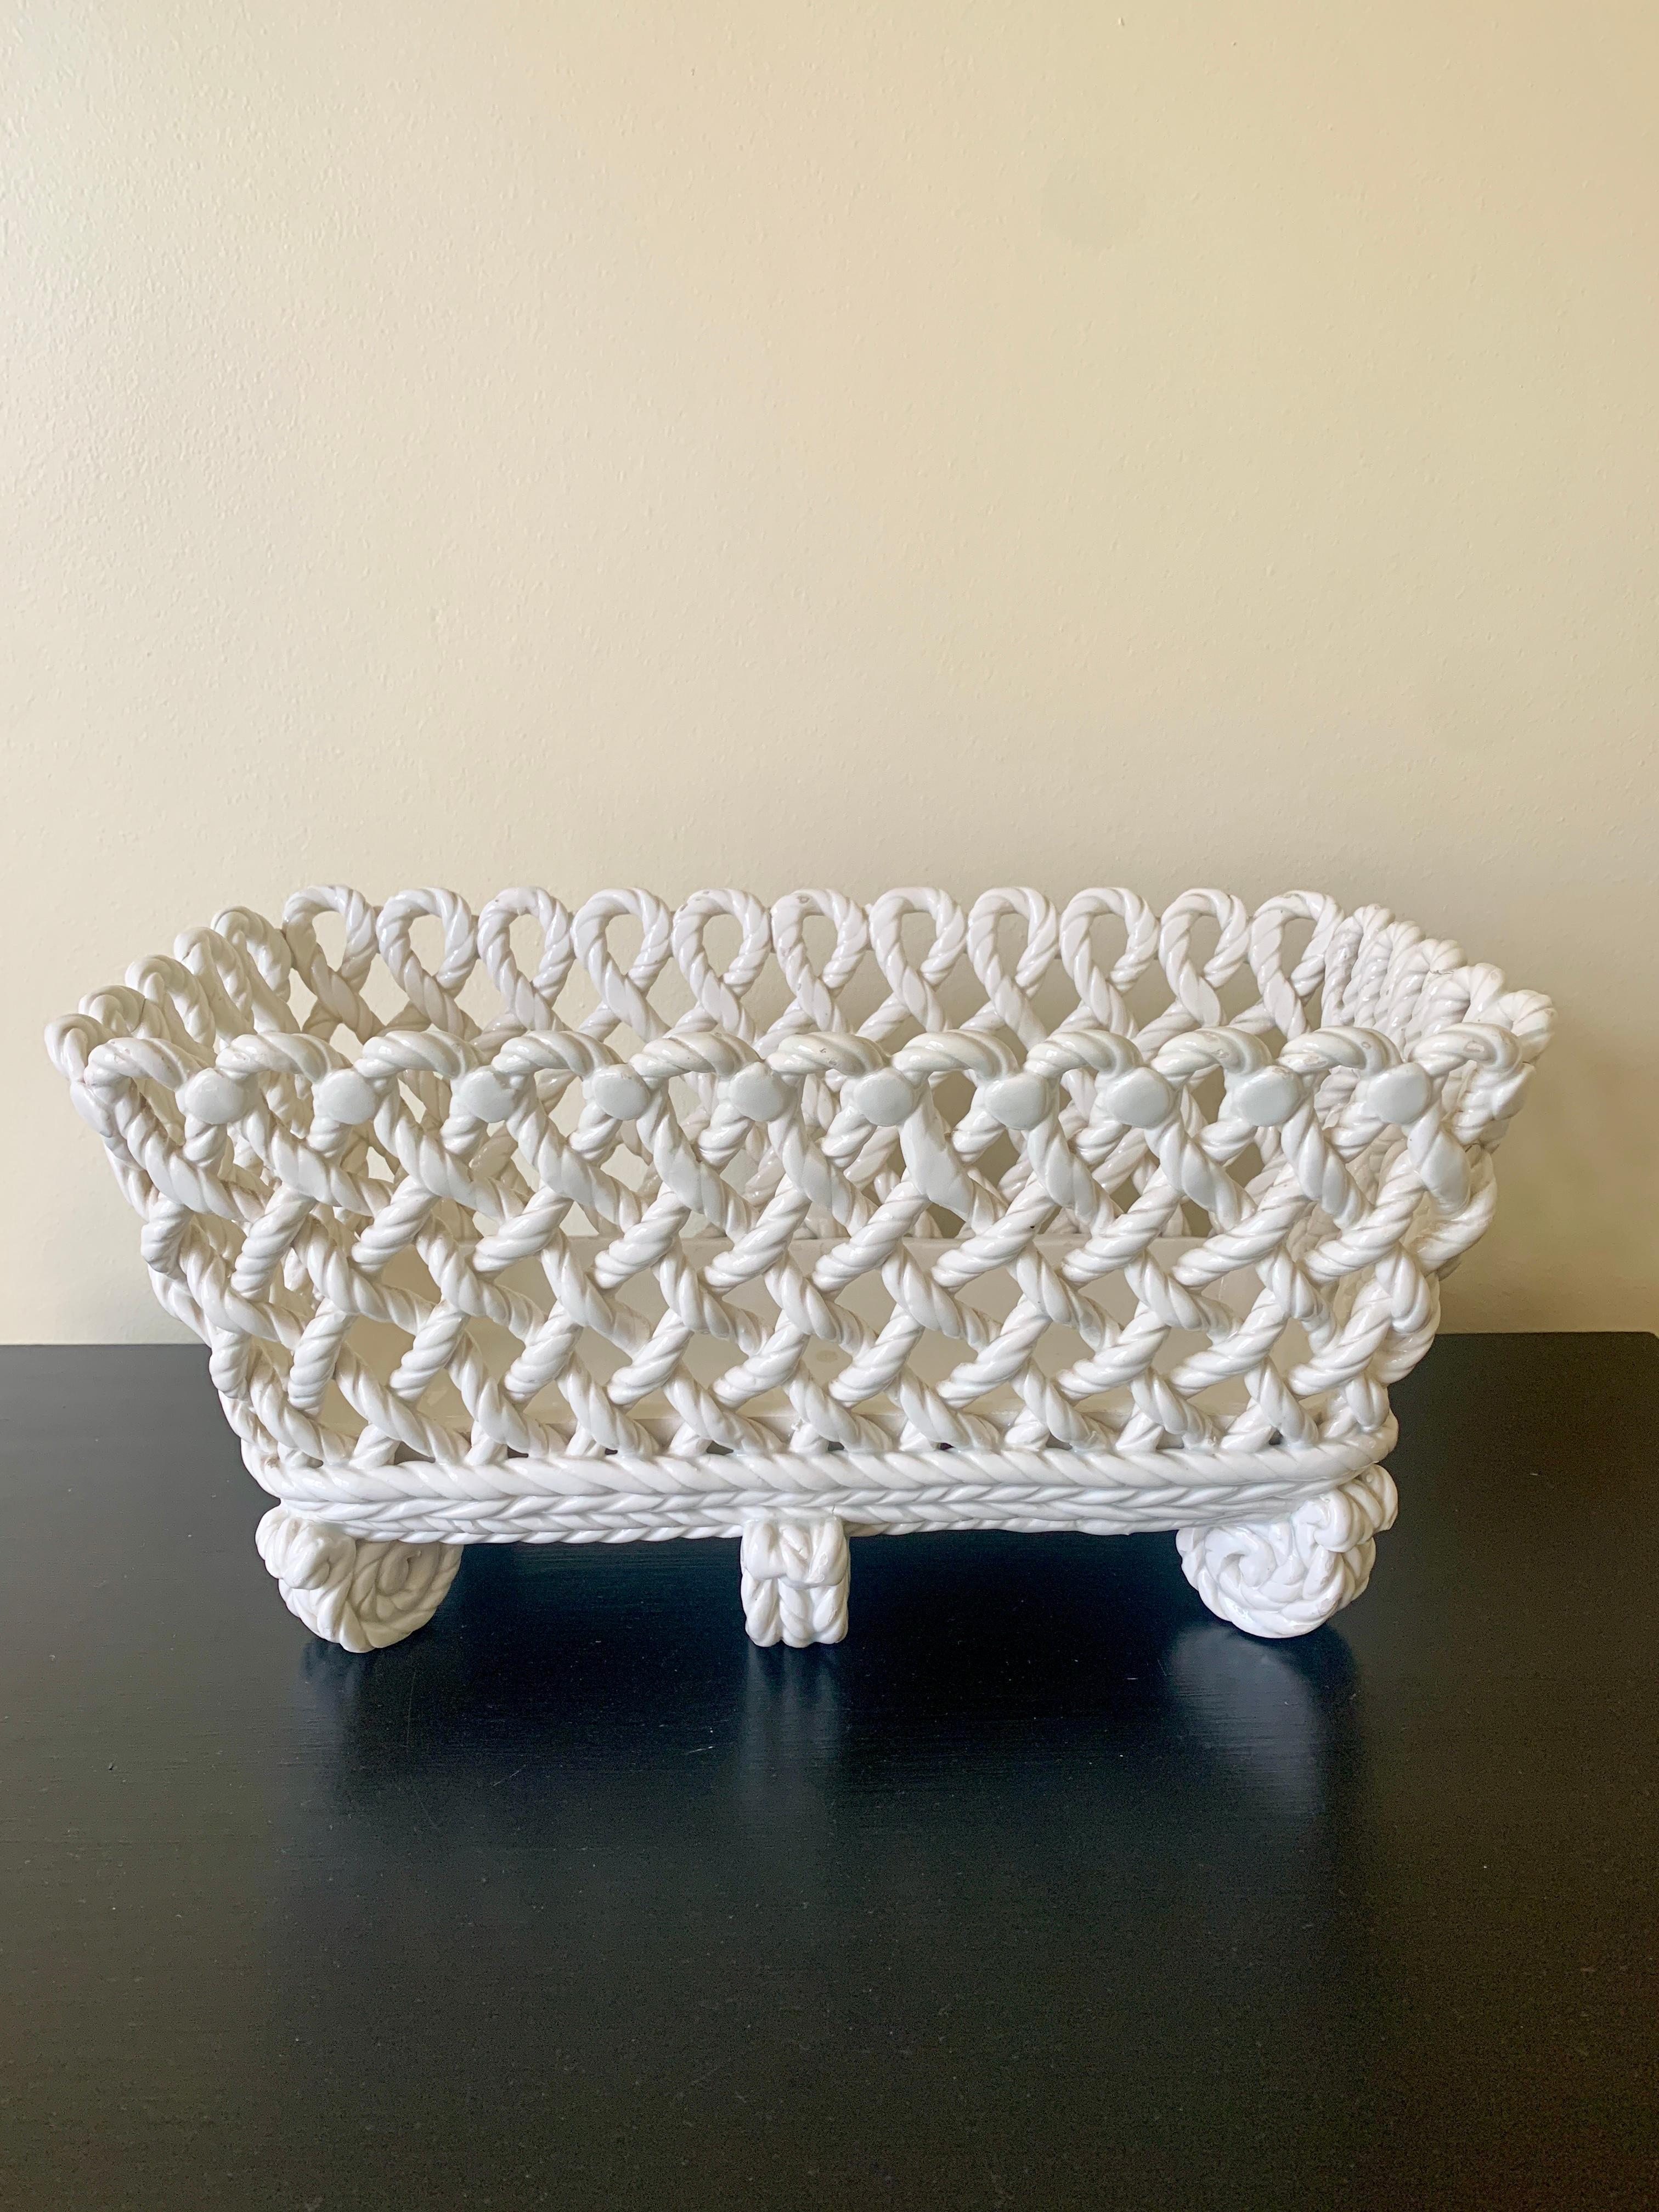 French Country White Ceramic Woven Rope Cachepot Basket For Sale 4